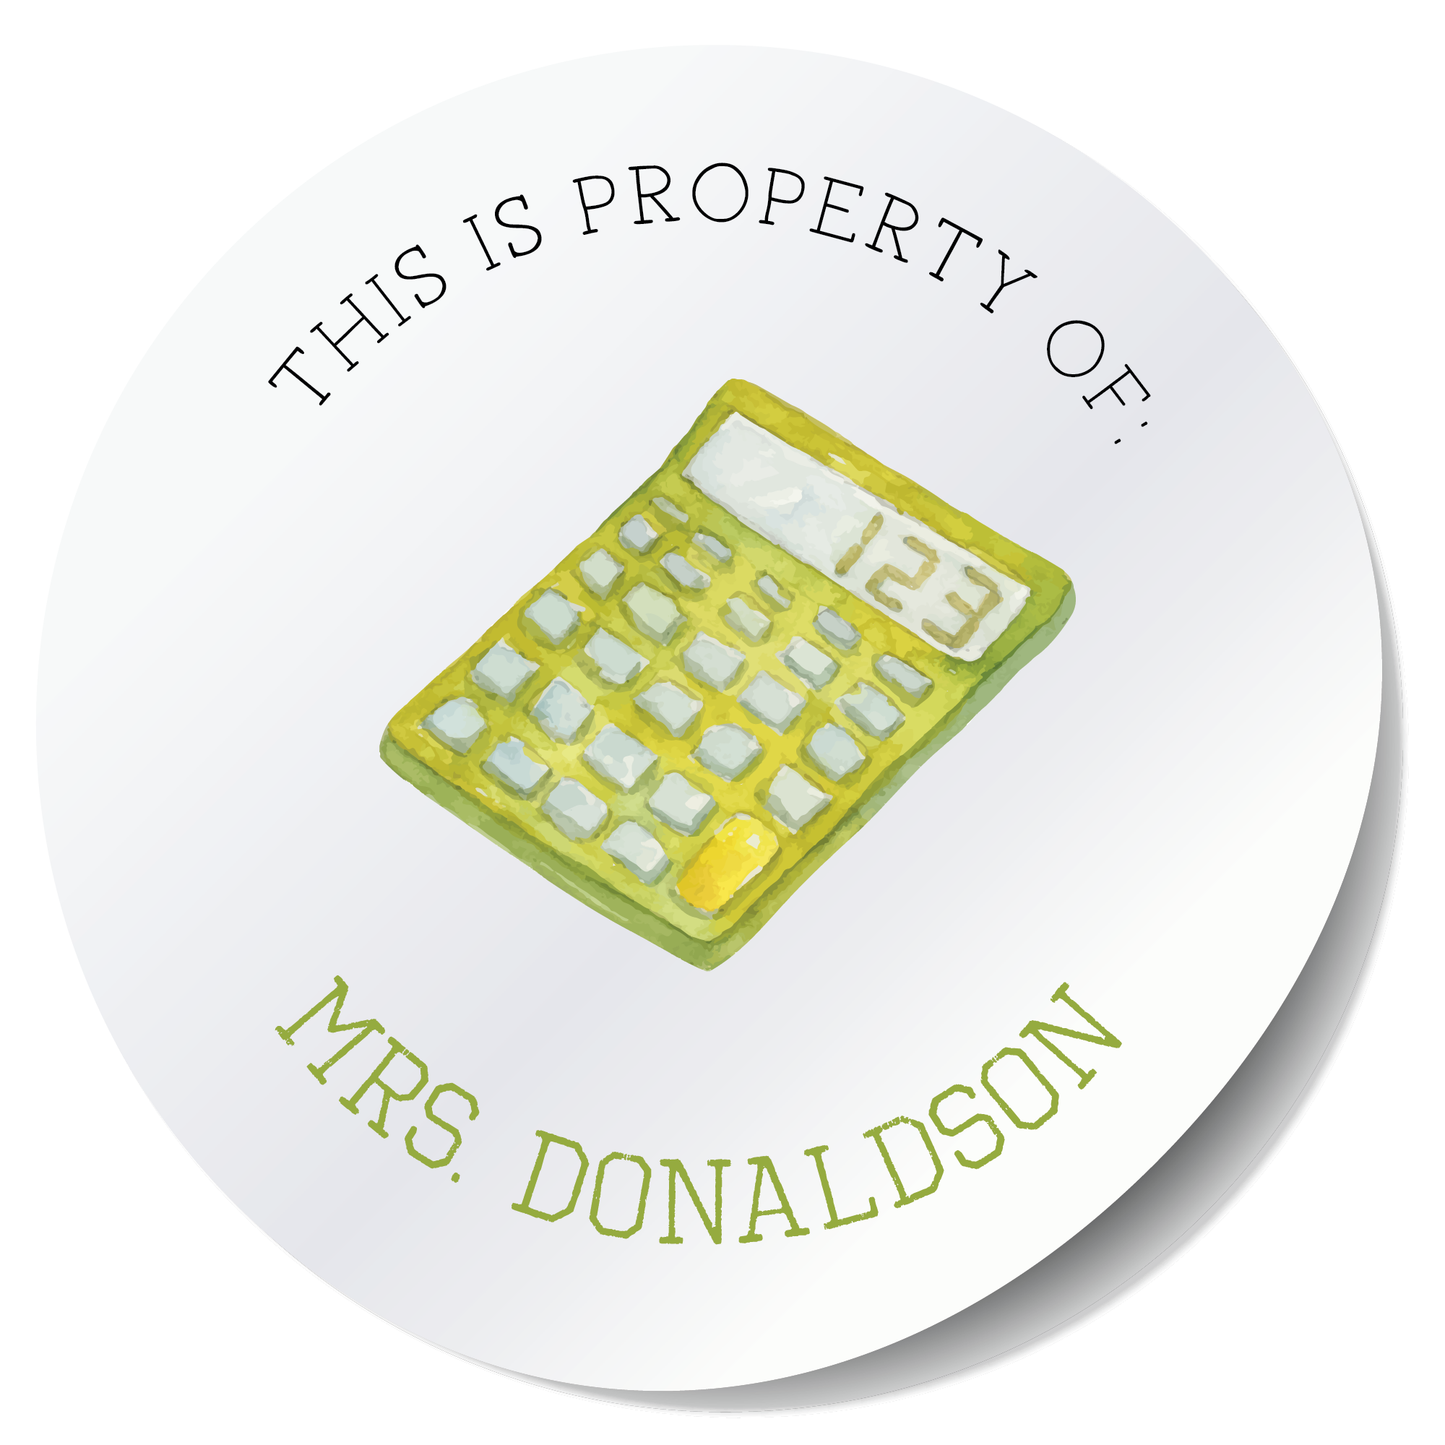 Calculator Property of Teacher or Student Stickers